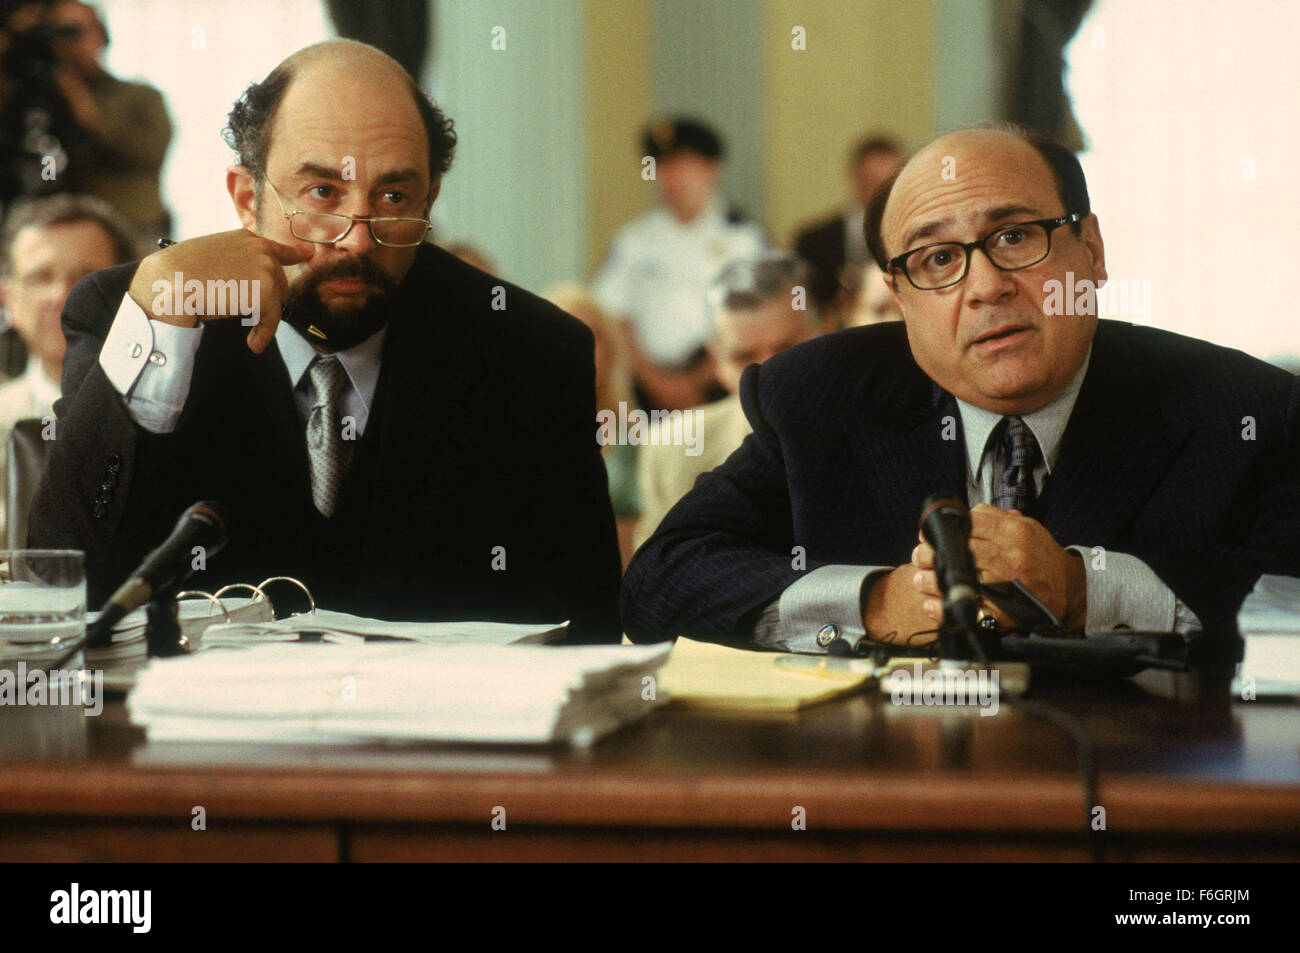 Jun 01, 2001; Boston , MA, USA; Actor RICHARD SCHIFF as Walter Greenbaum and DANNY DEVITO as Max Fairbanks star in 'What's The Worst That Could Happen?' Stock Photo